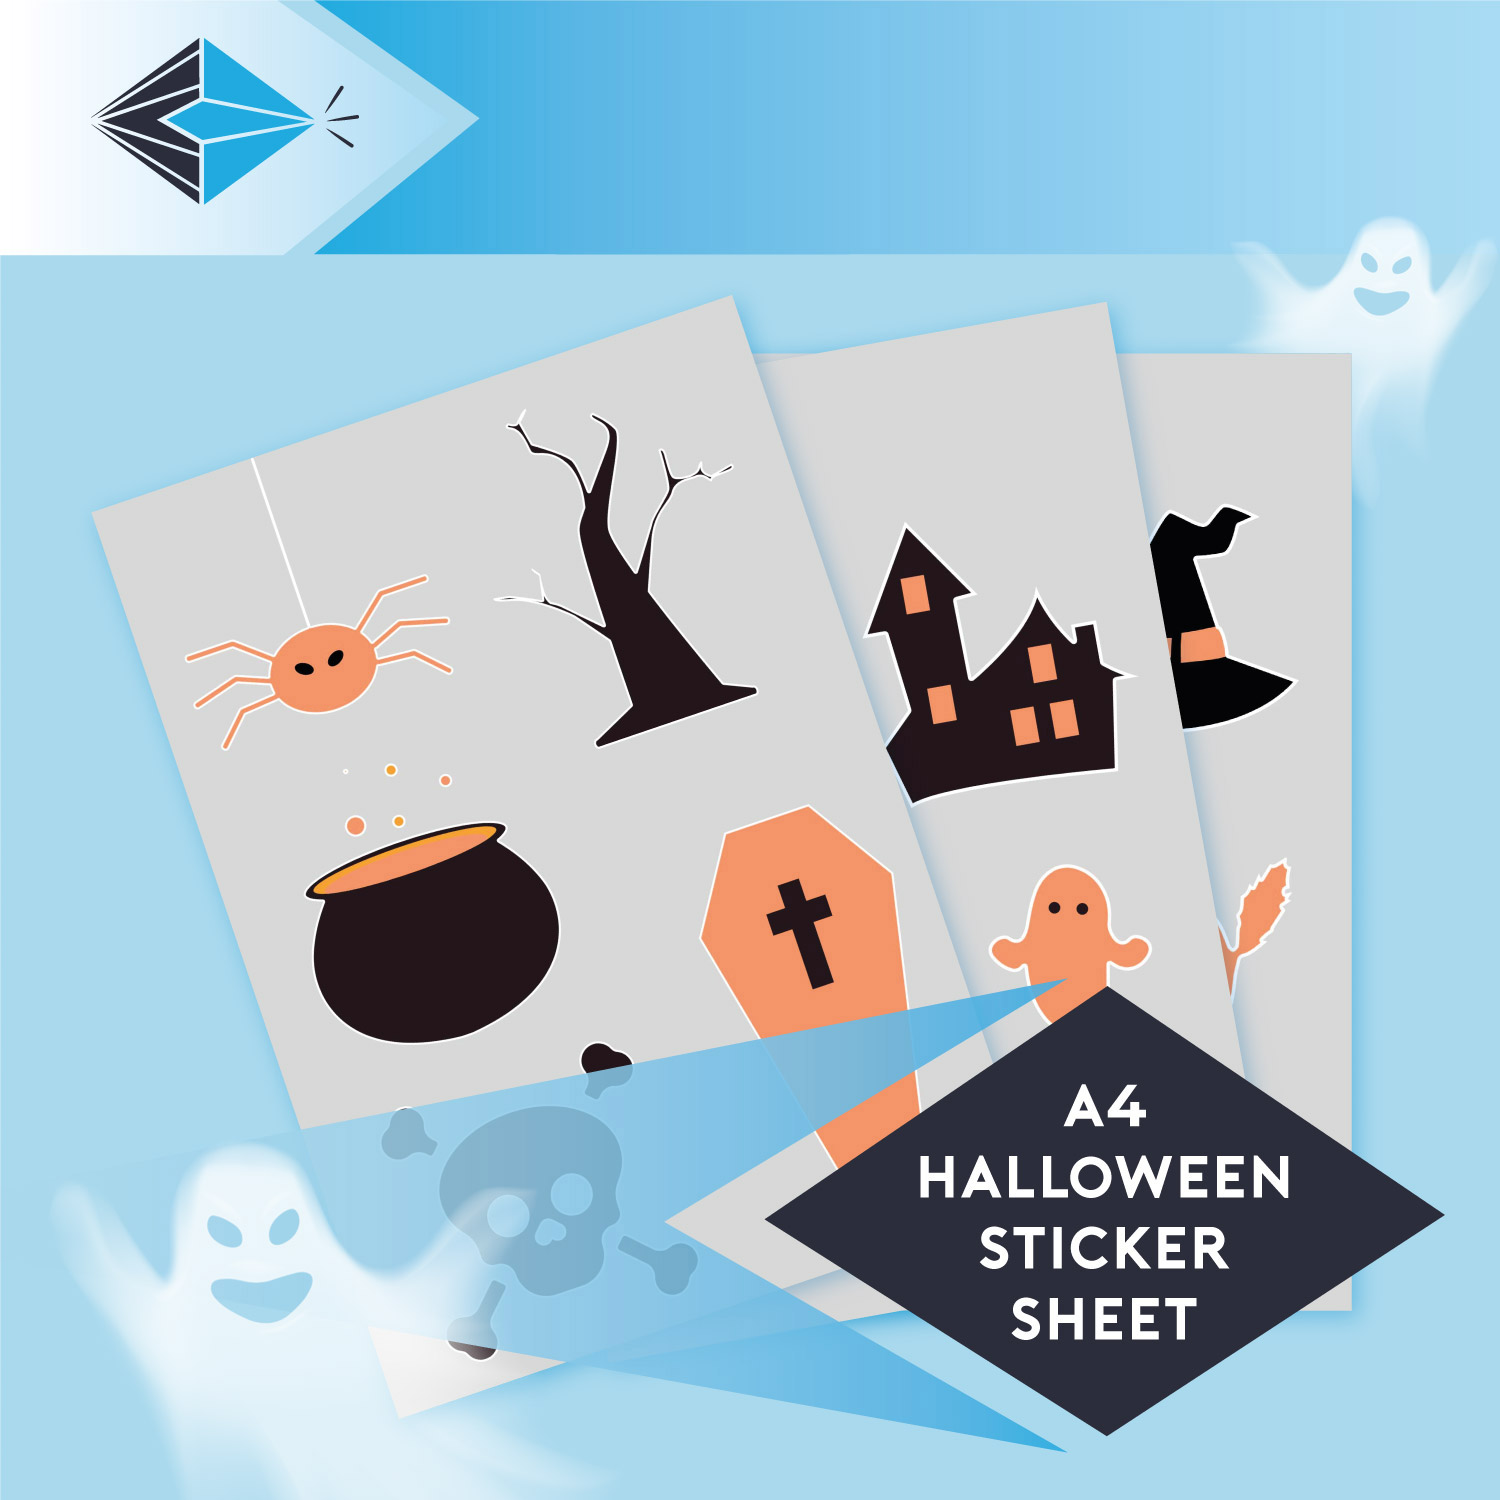 A4 Haloween Sticker SheetsDifferent Images Vinyl Sheets For Halloween Decorations October Stockport Manchester UK